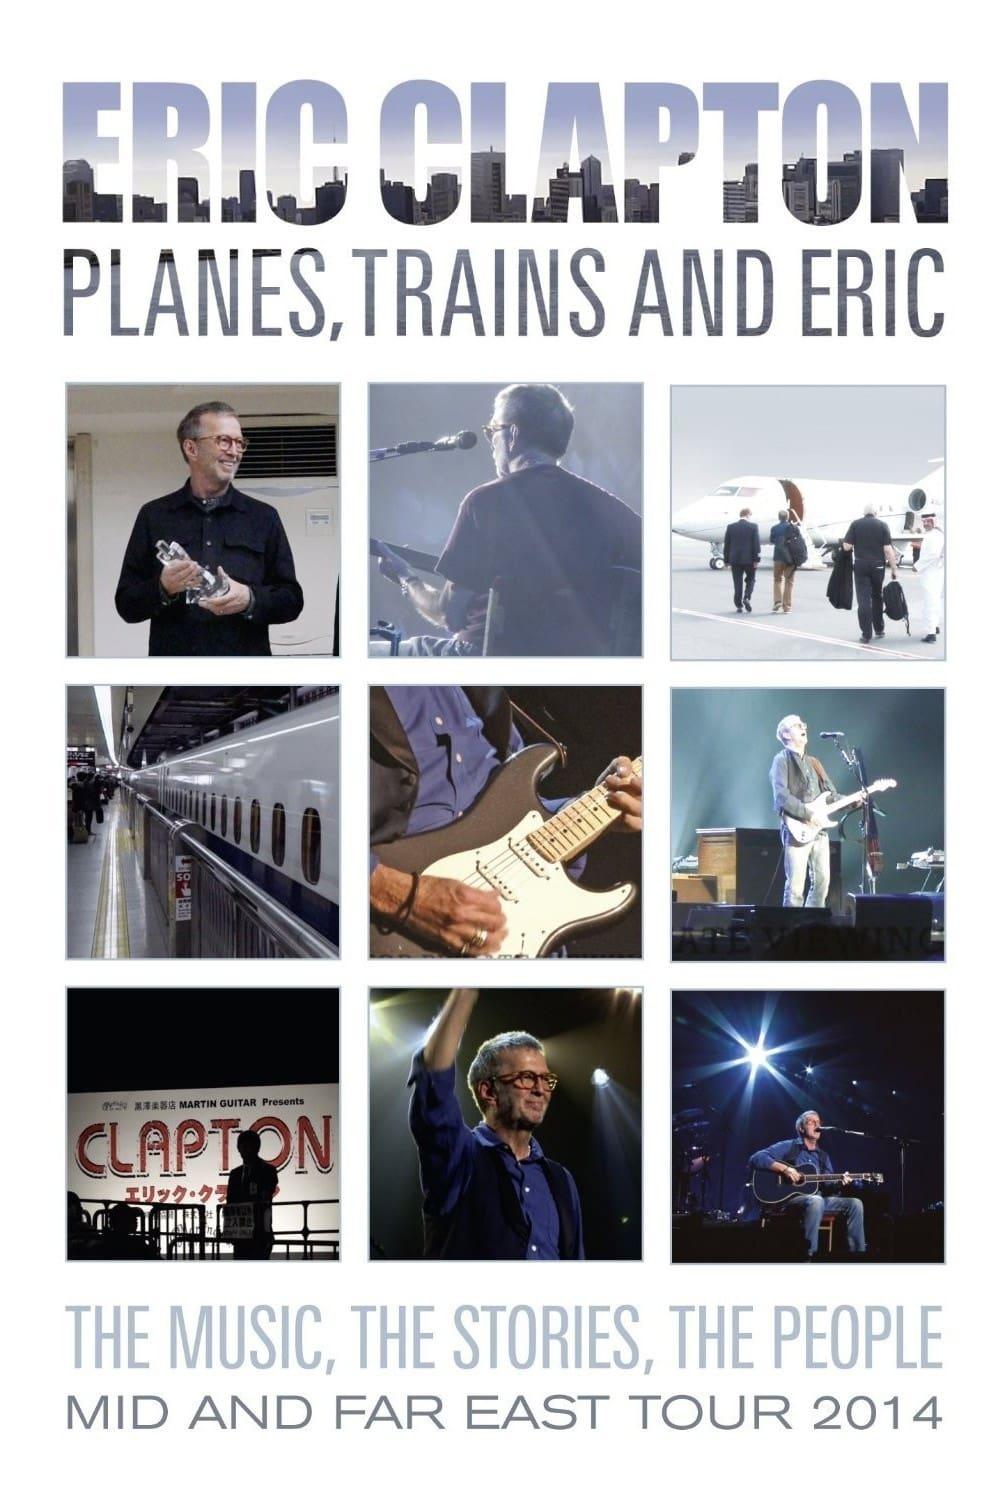 Eric Clapton - Planes, Trains and Eric poster